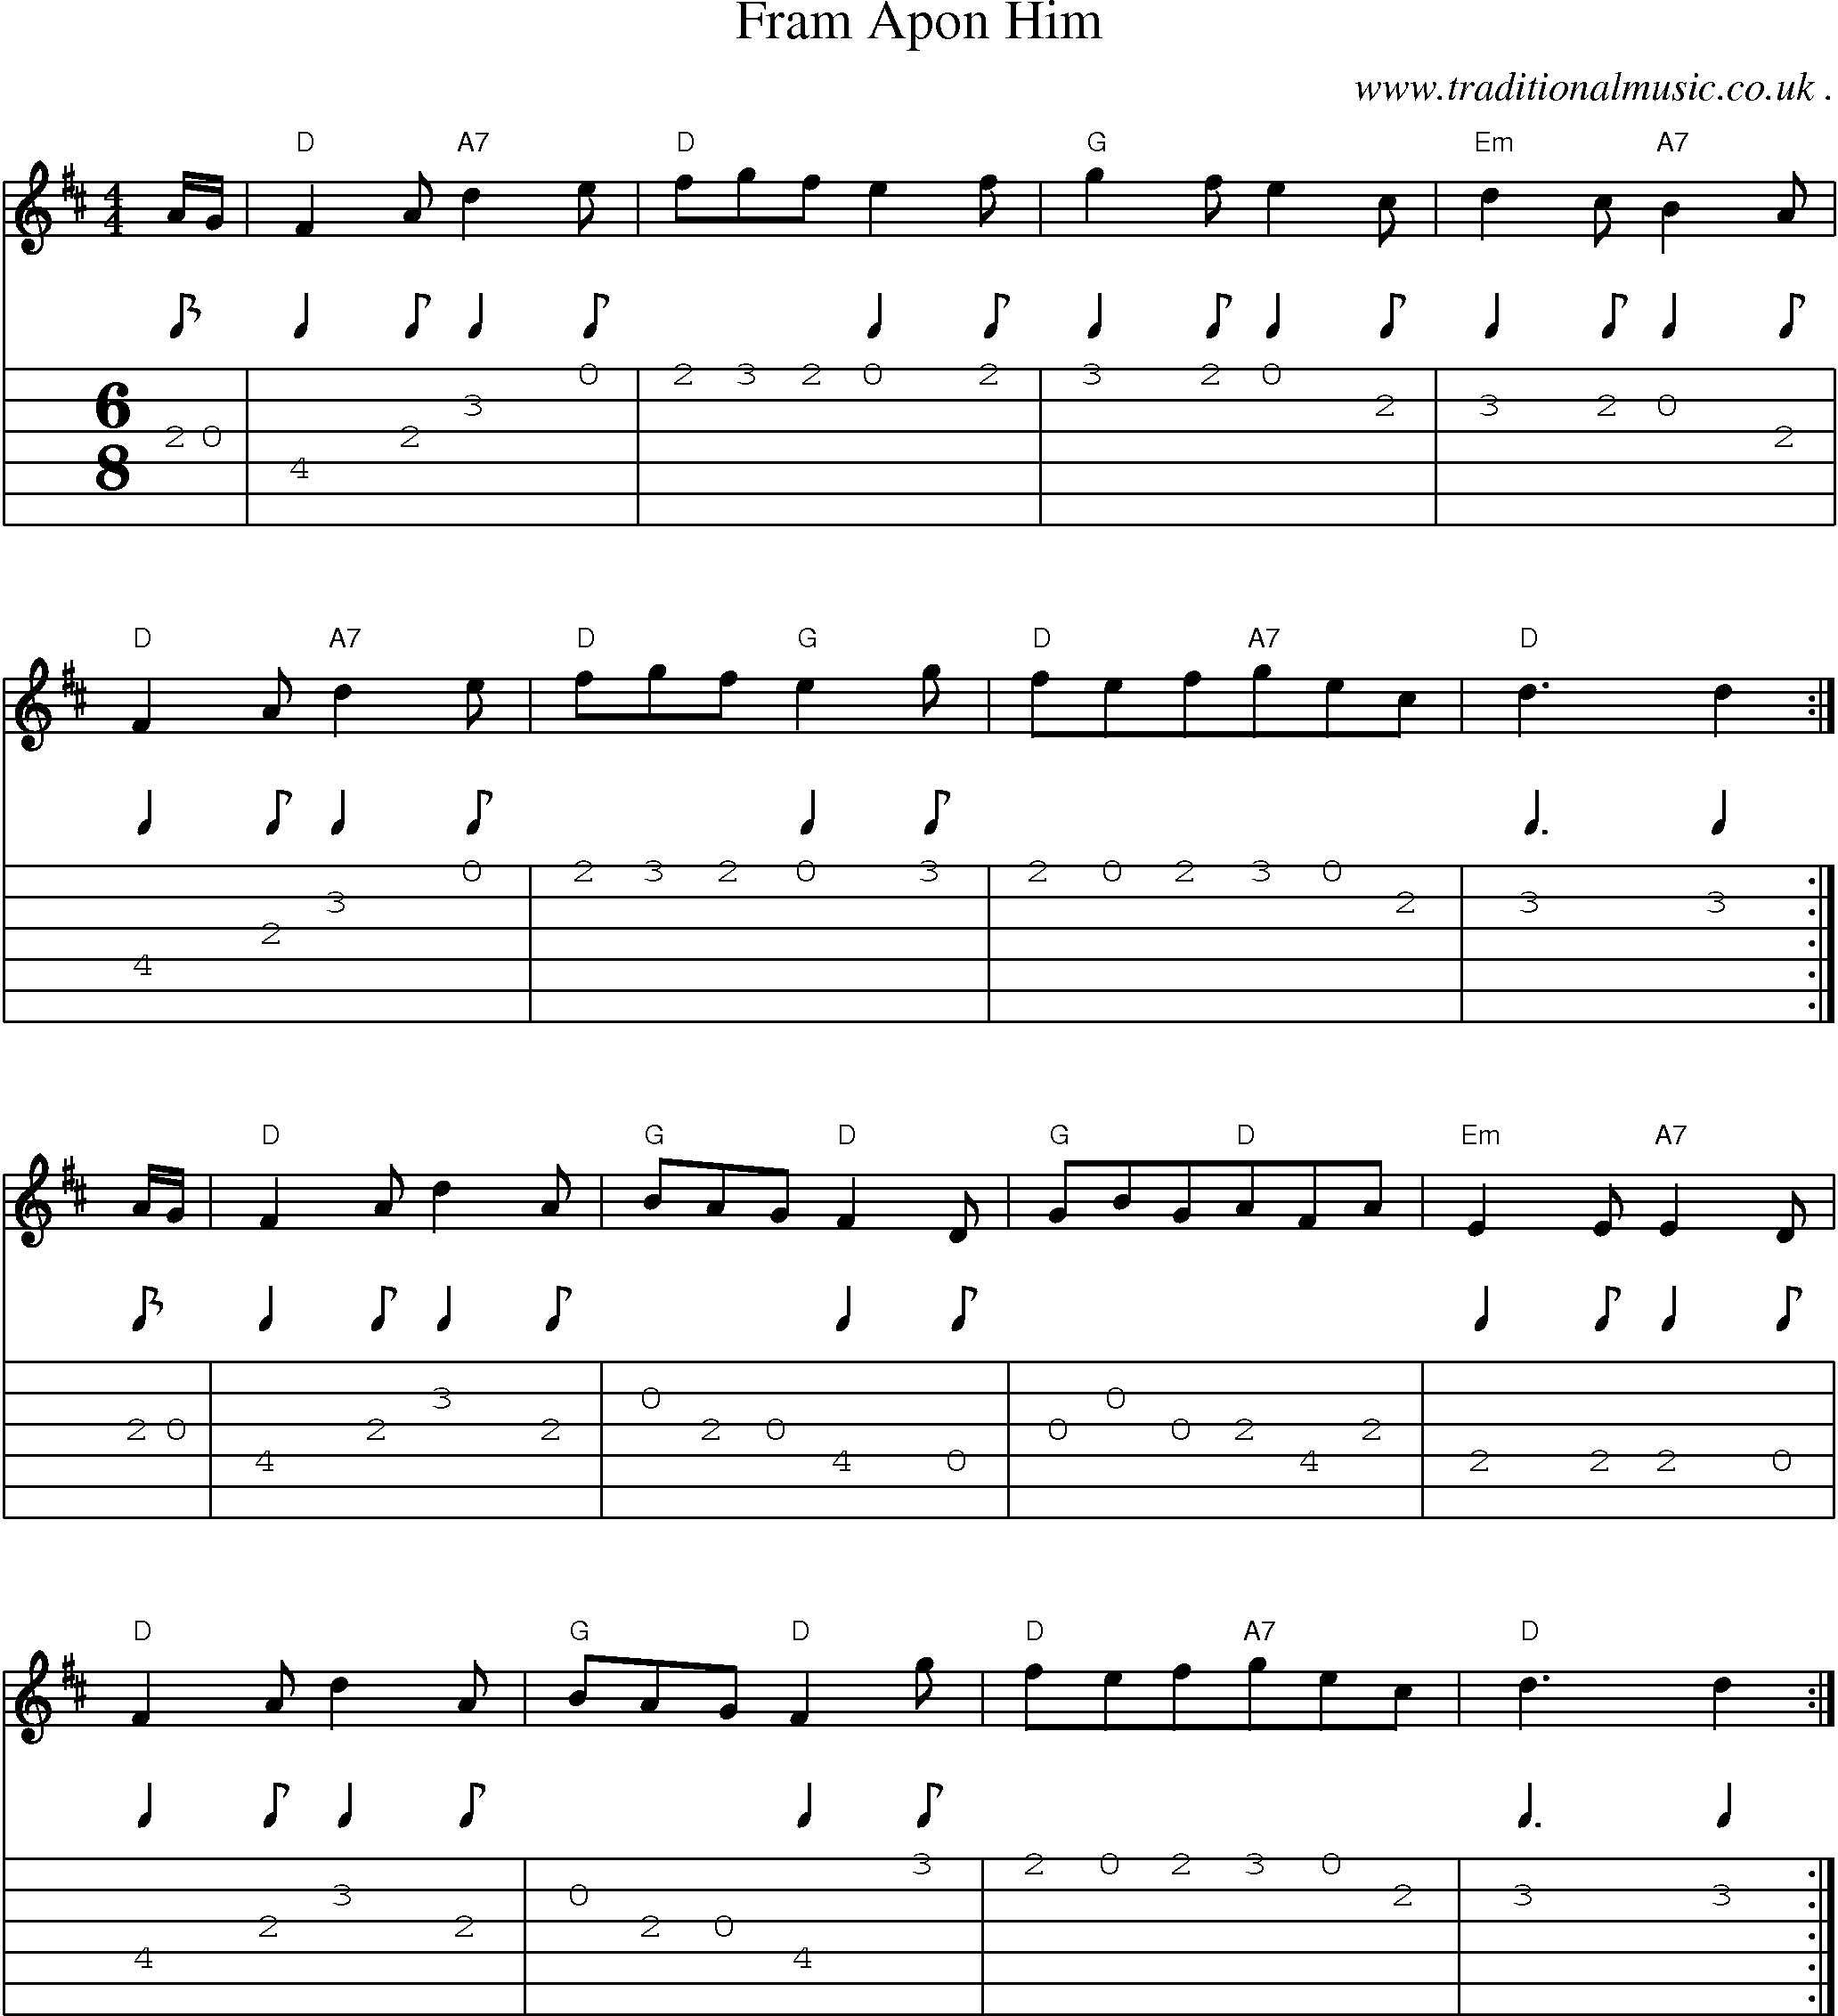 Sheet-Music and Guitar Tabs for Fram Apon Him